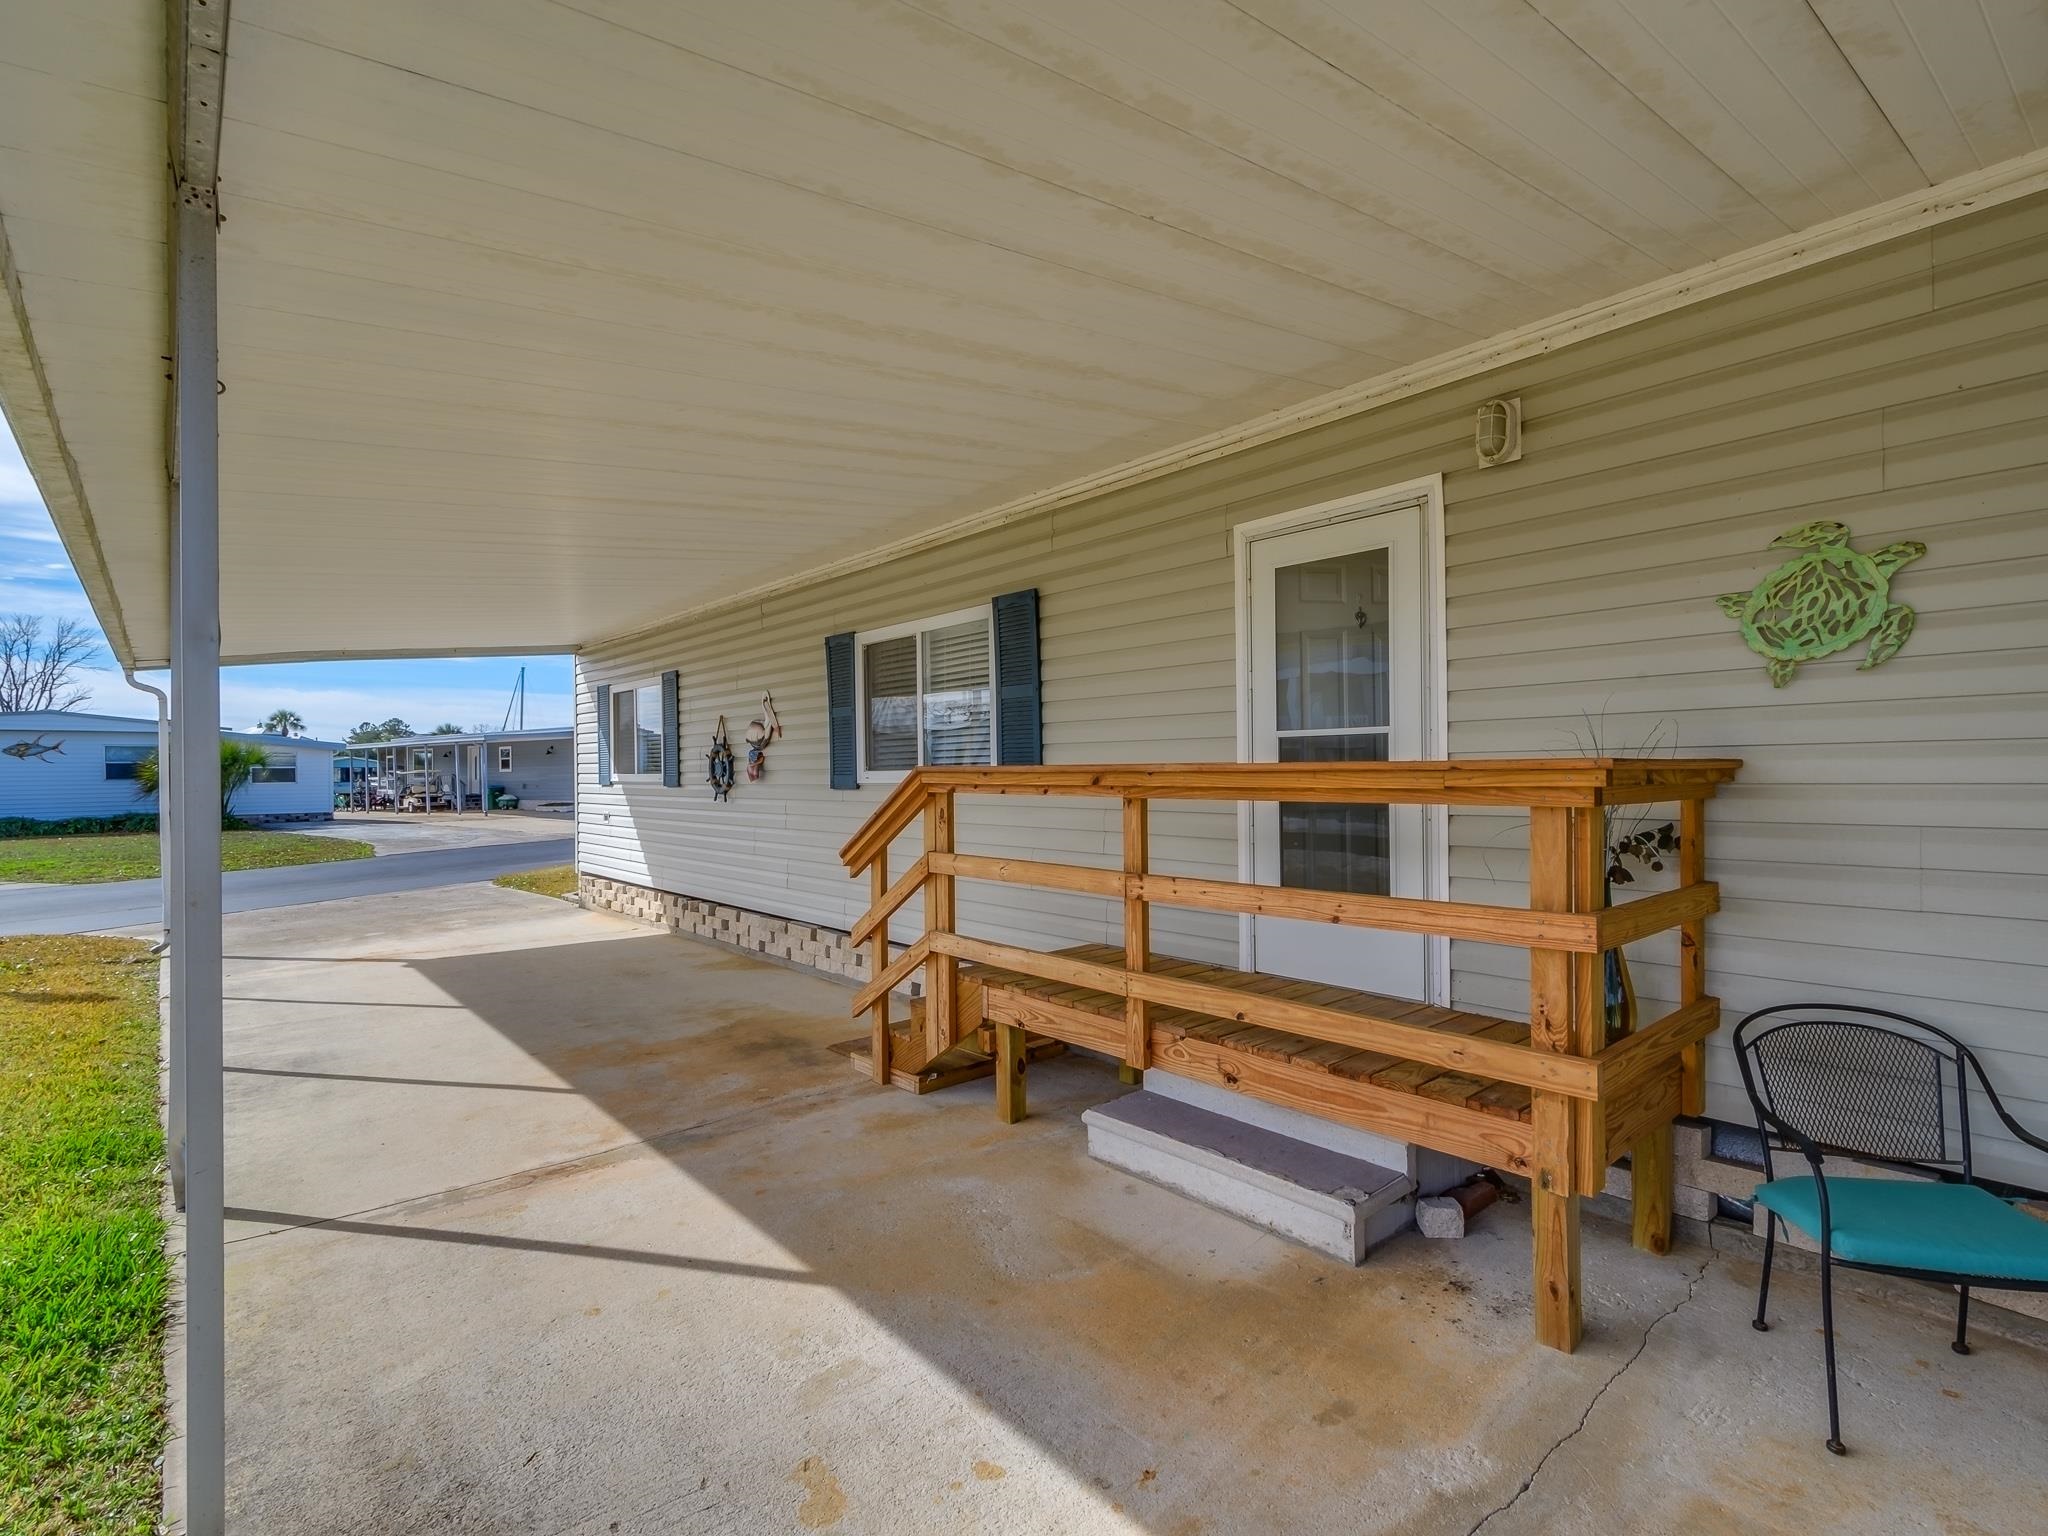 68 Connie Drive,CRAWFORDVILLE,Florida 32327,3 Bedrooms Bedrooms,2 BathroomsBathrooms,Manuf/mobile home,68 Connie Drive,370124